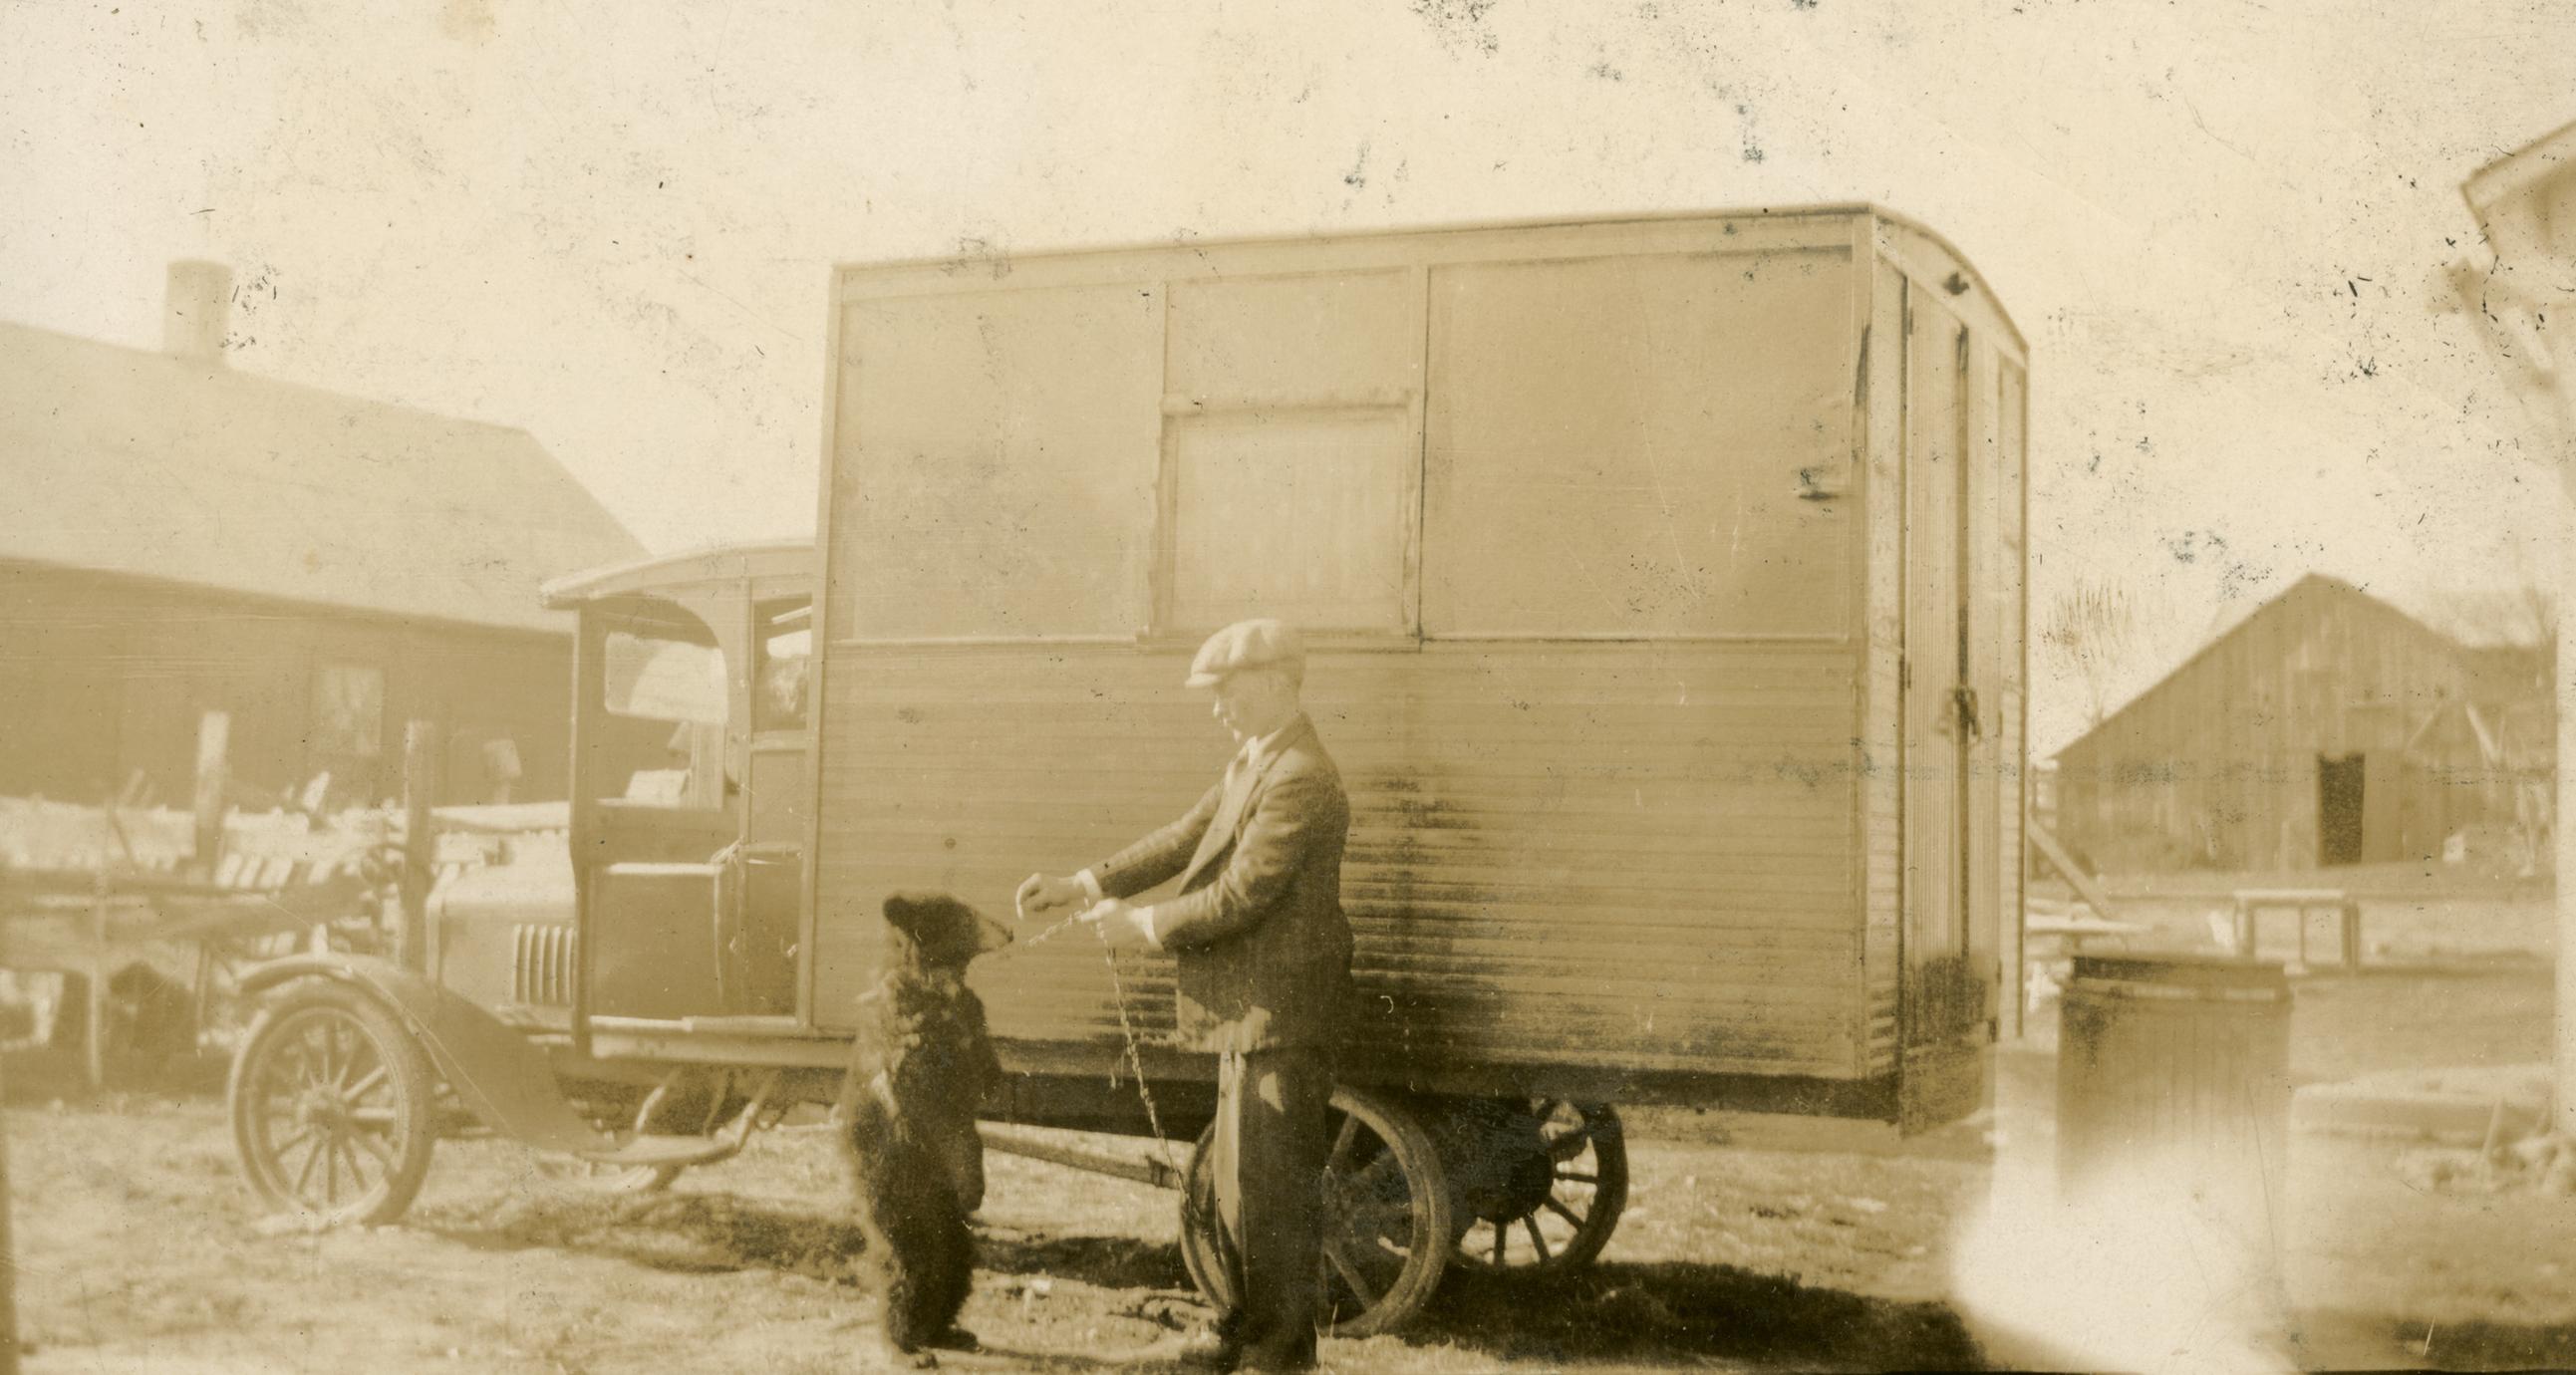 Frank Hall with bear in front of circus truck